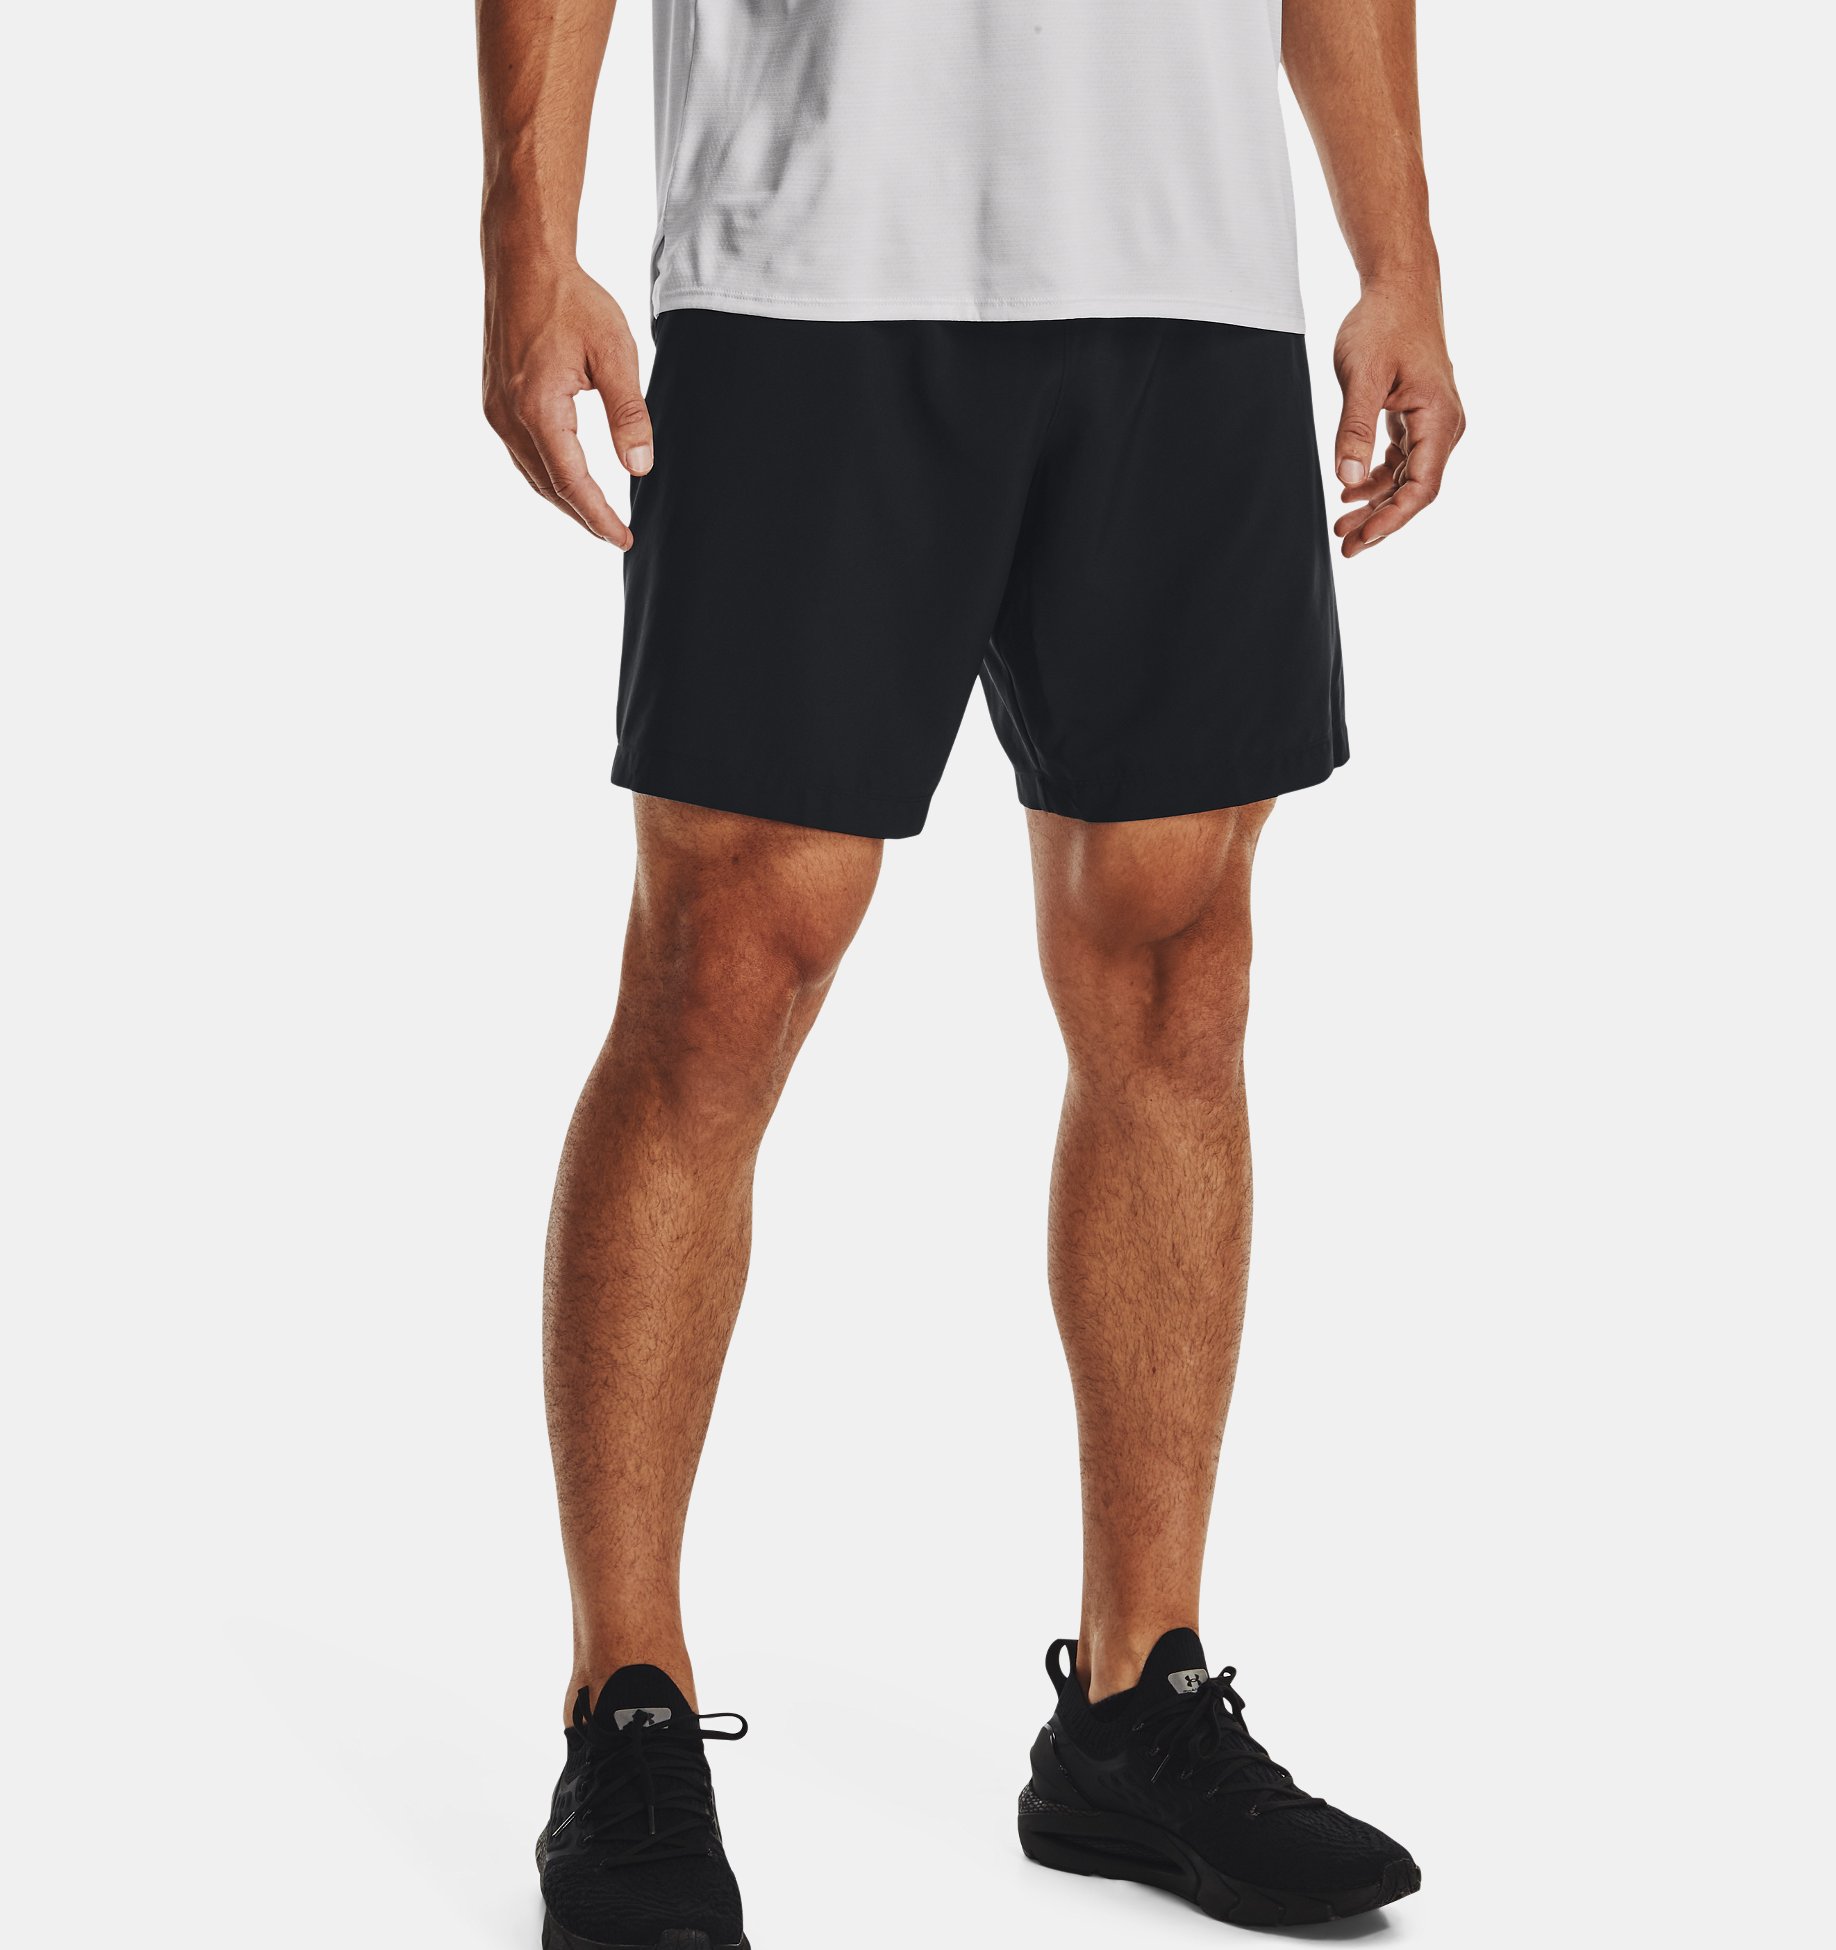 Black Under Armour Woven Graphic Mens Training Shorts 